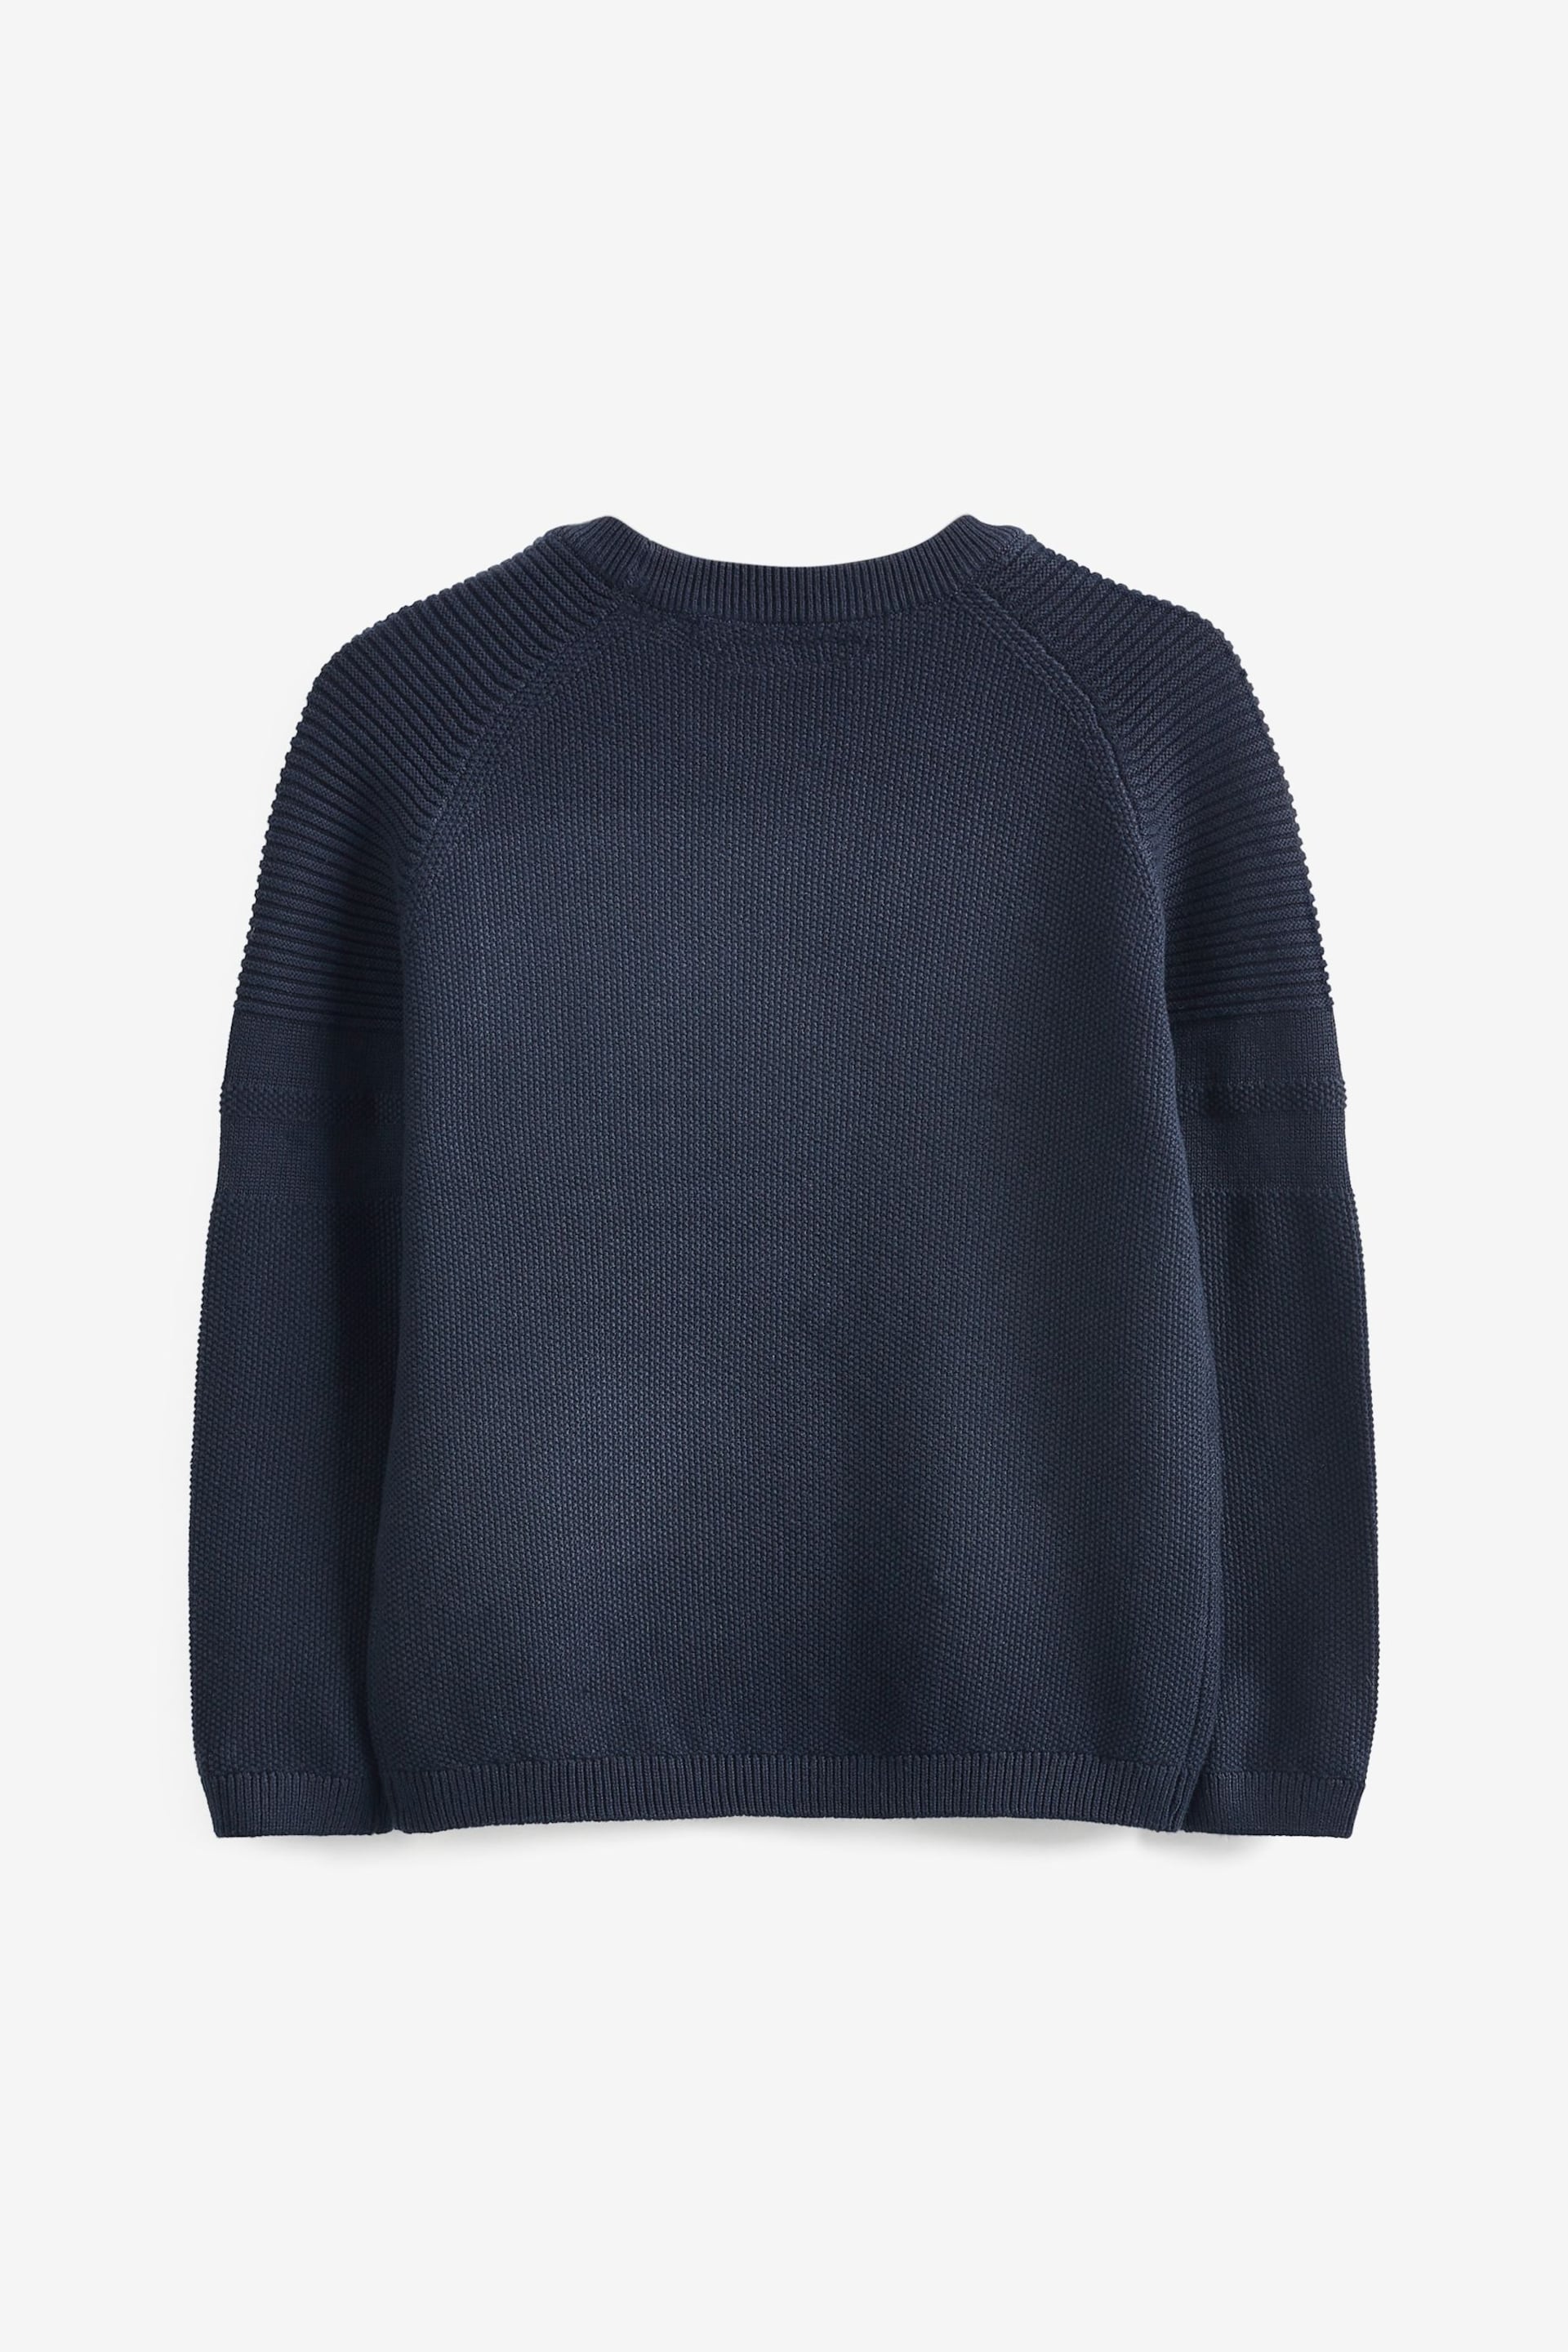 Navy Without Stag Textured Crew Jumper (3-16yrs) - Image 2 of 2